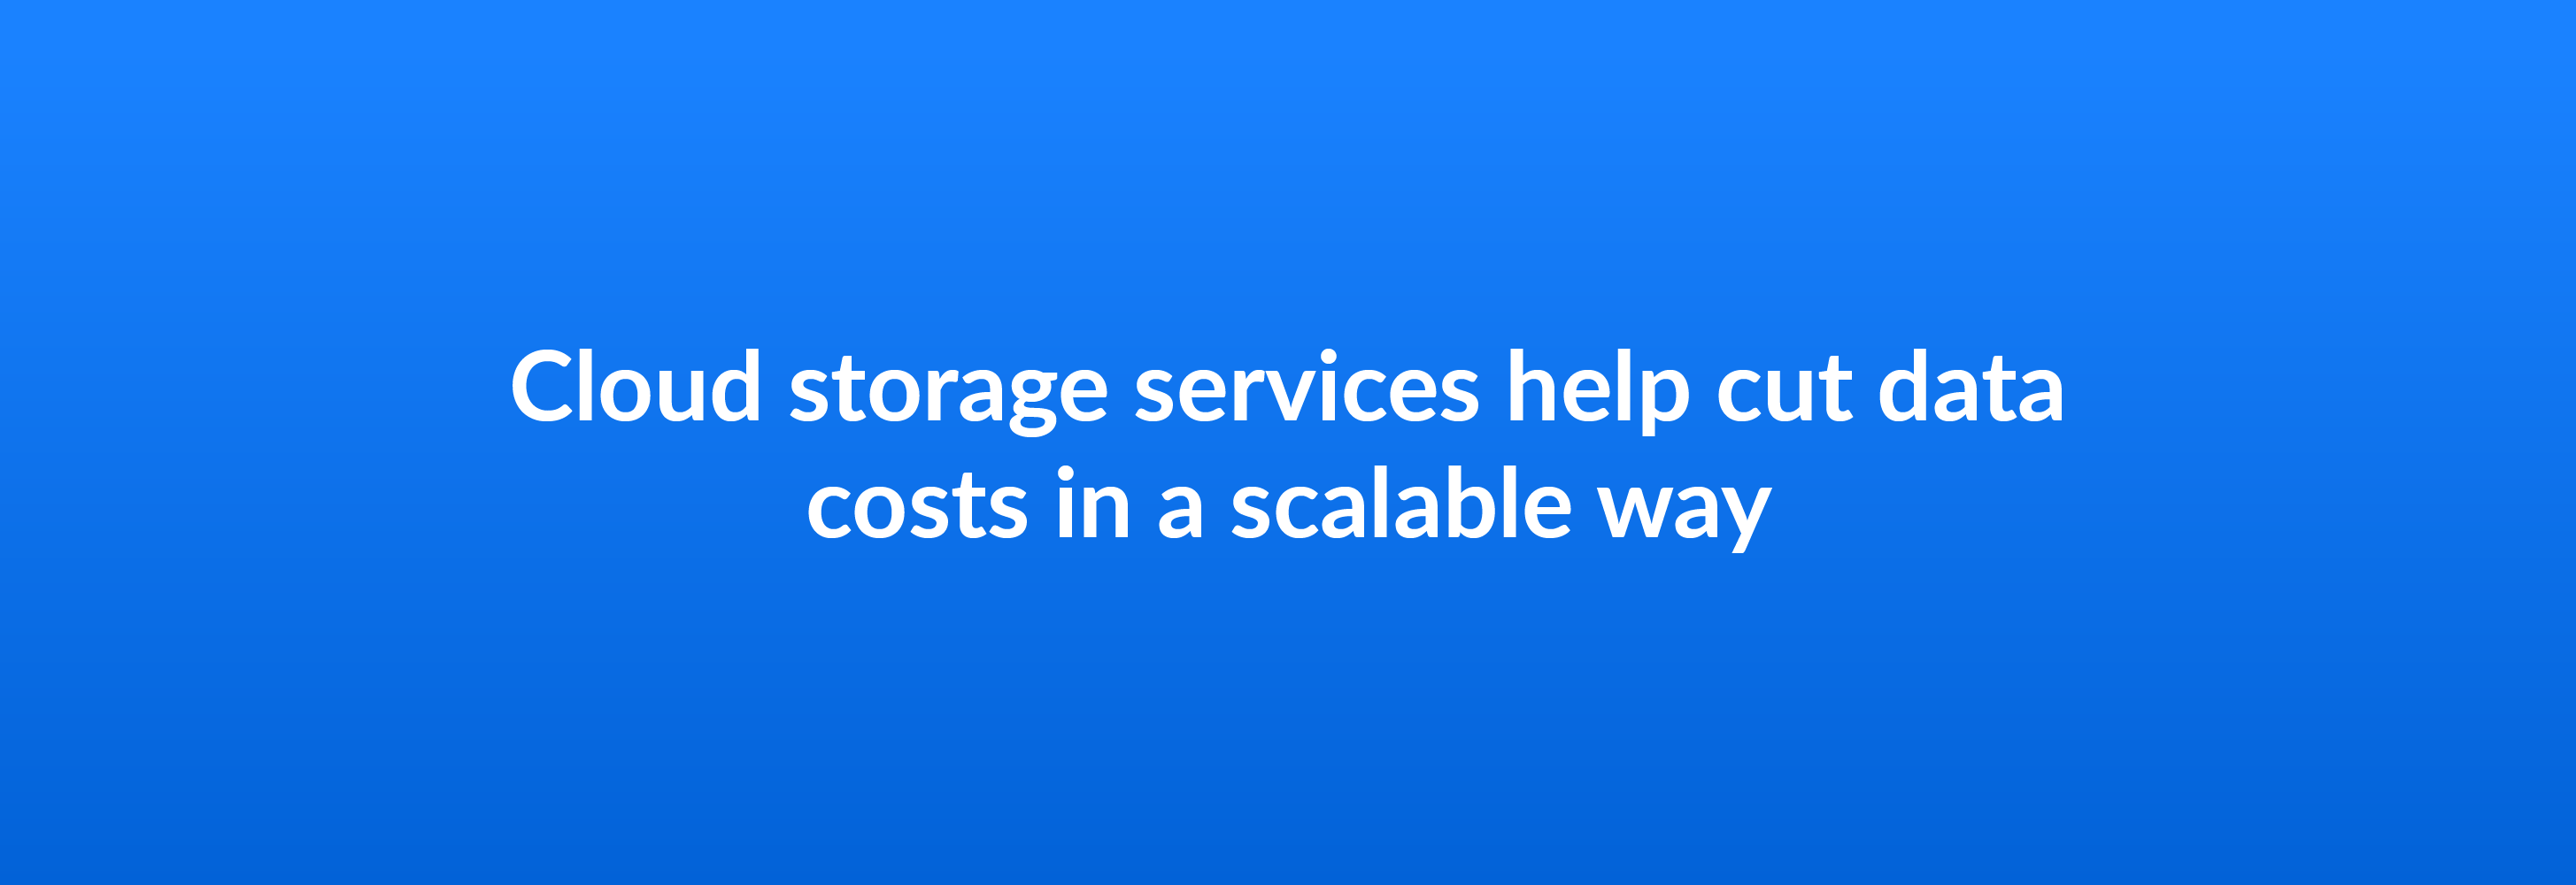 Cloud storage services help cut data costs in a scalable way